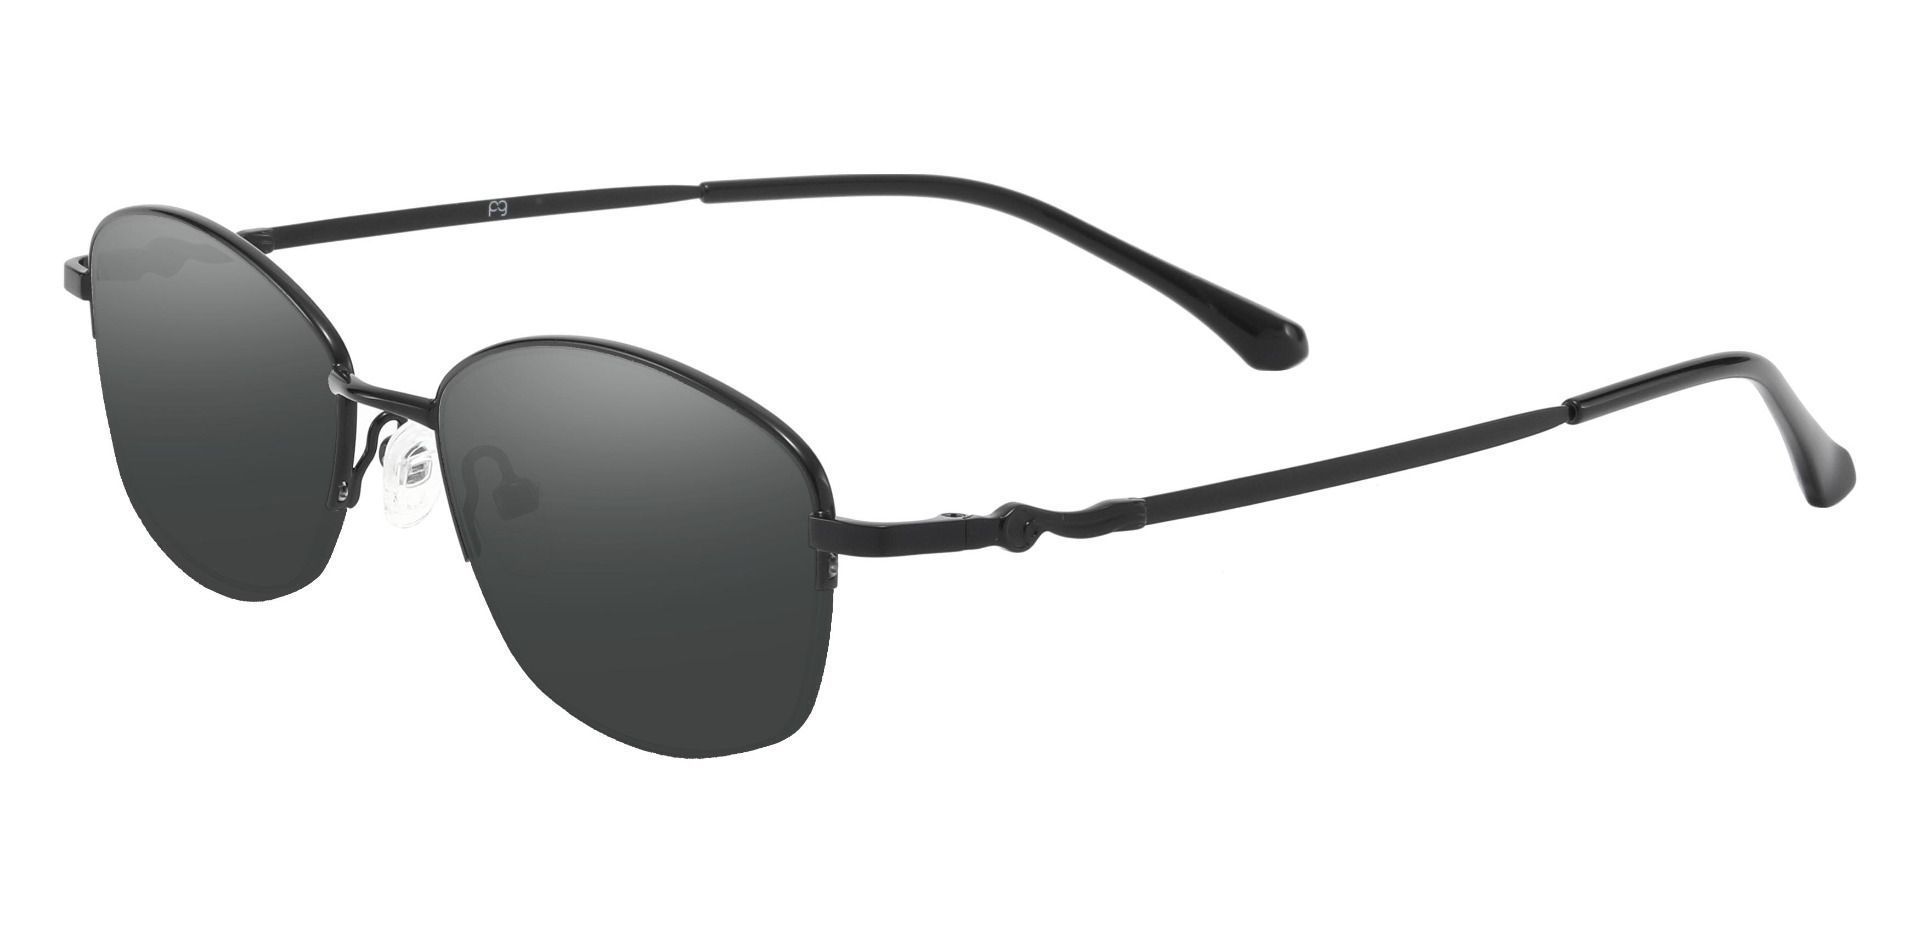 Beulah Oval Non-Rx Sunglasses - Black Frame With Gray Lenses